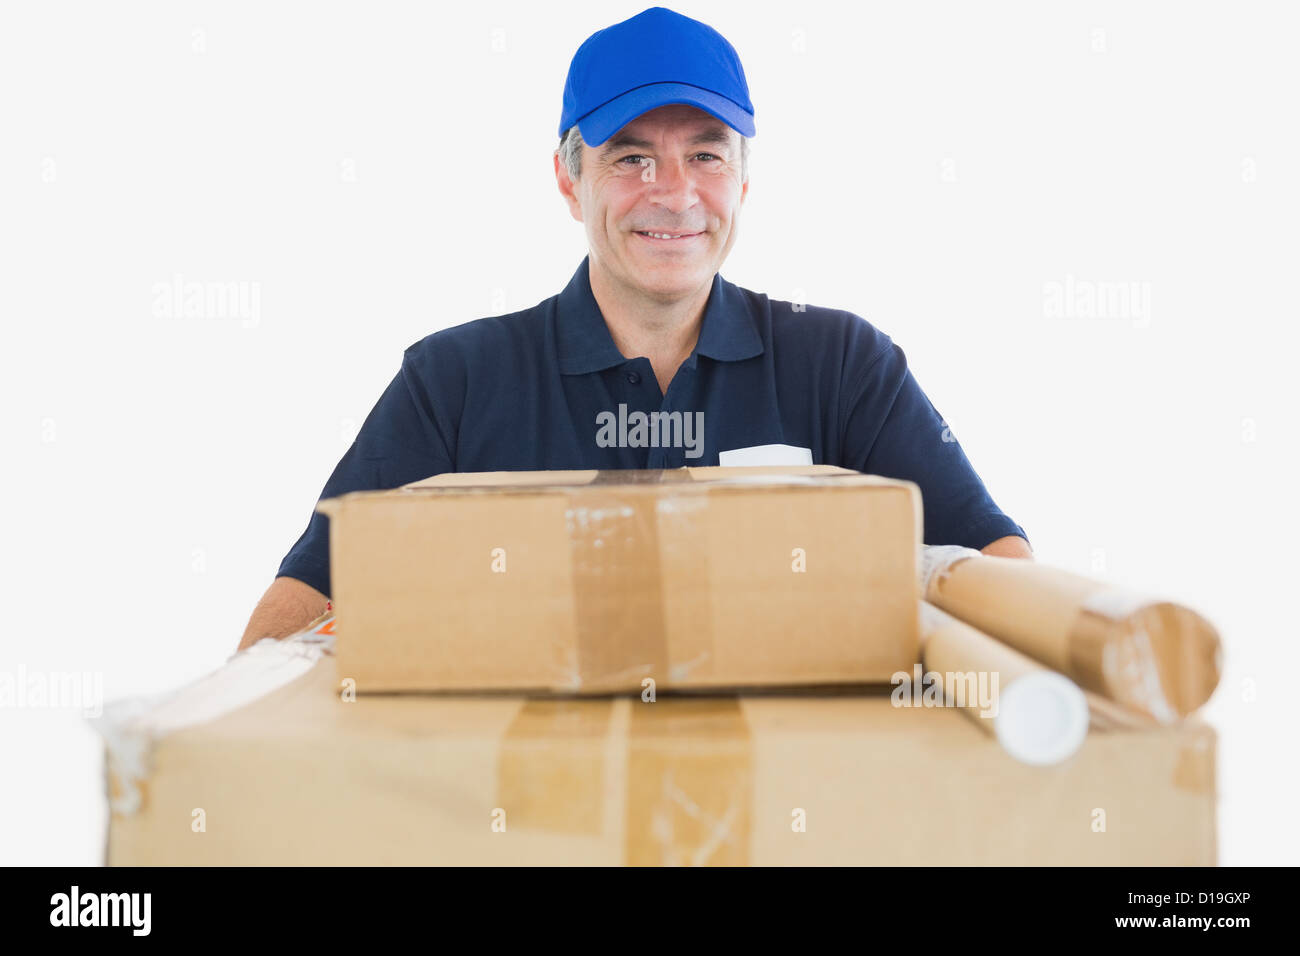 Mature courier man carrying cardboard boxes Banque D'Images